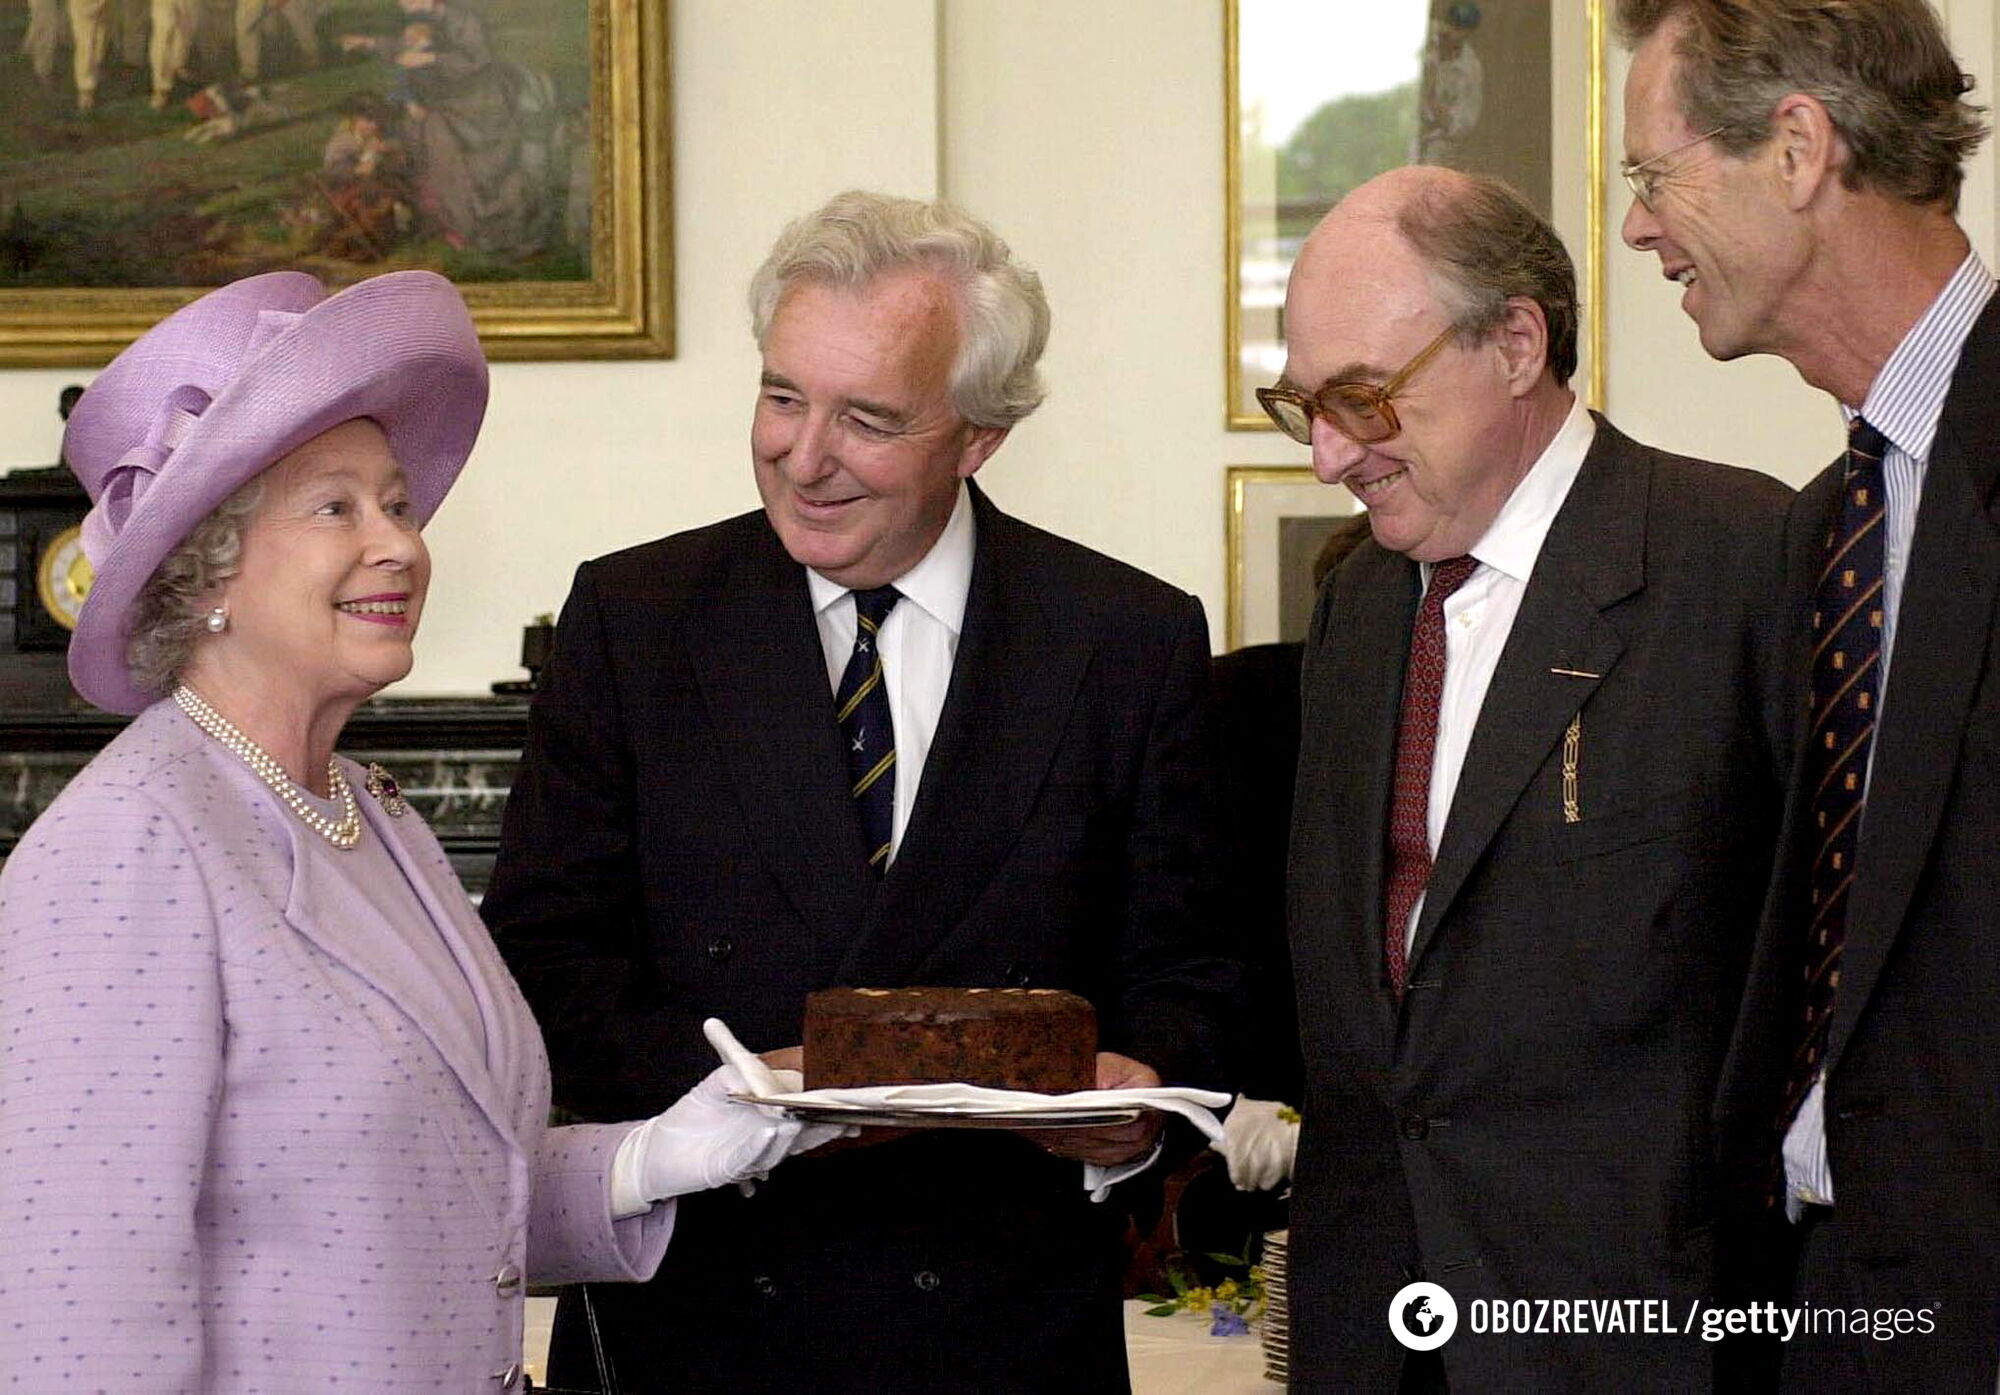 No potatoes, rice or pasta: royal chef reveals what the late Elizabeth II asked not to serve